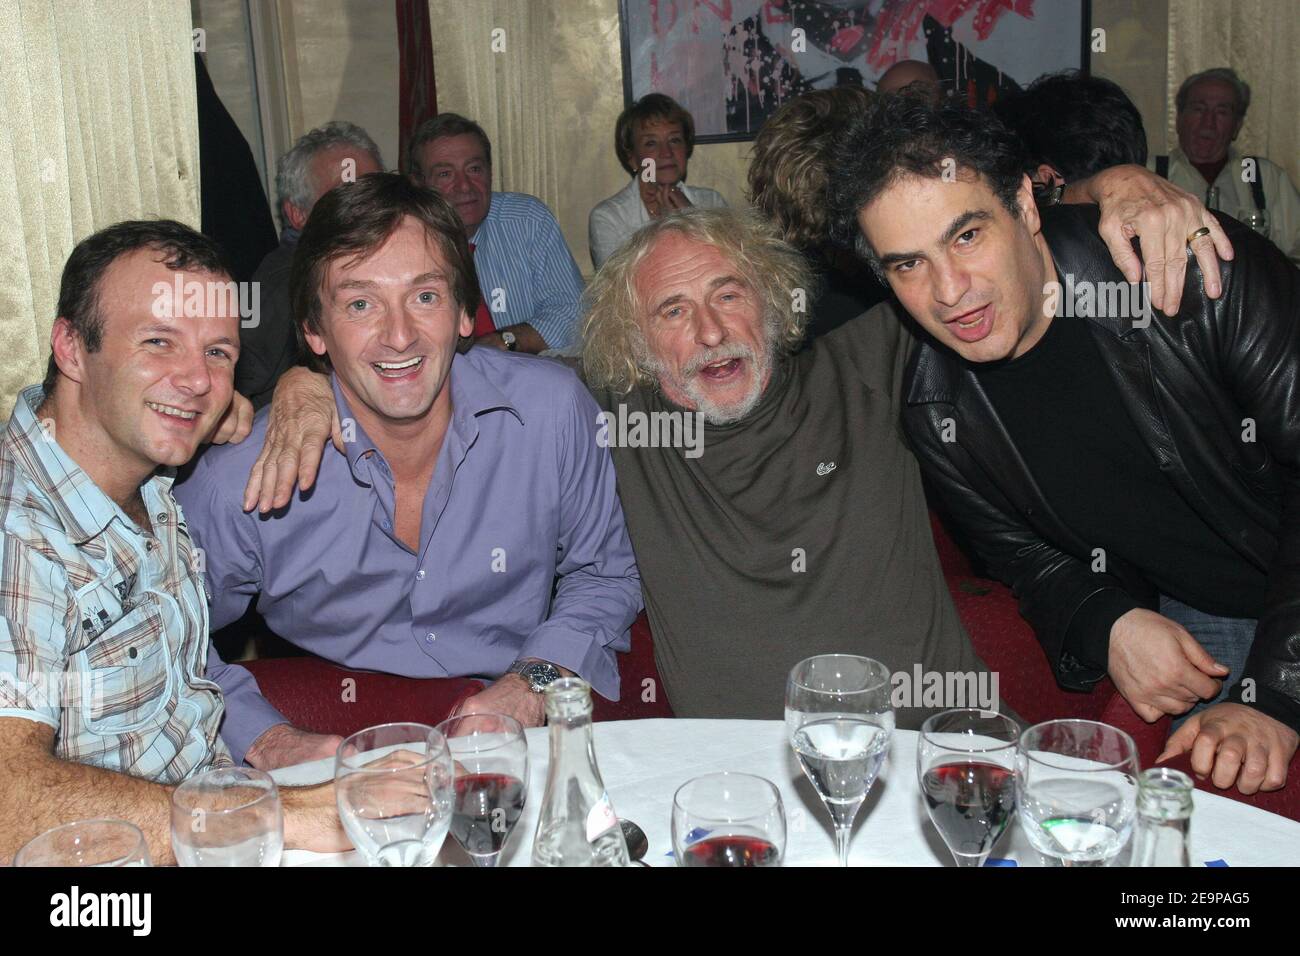 French actors Pierre-Francois Martin-Laval, Pierre Palmade, Pierre Richard and French humorist Raphael Mezrahi celebrate the 50th representation of the play 'Pierre et Fils' at the club 'L'Etoile' in Paris, France, on November 17, 2006. Photo by Benoit Pinguet/ABACAPRESS.COM Stock Photo